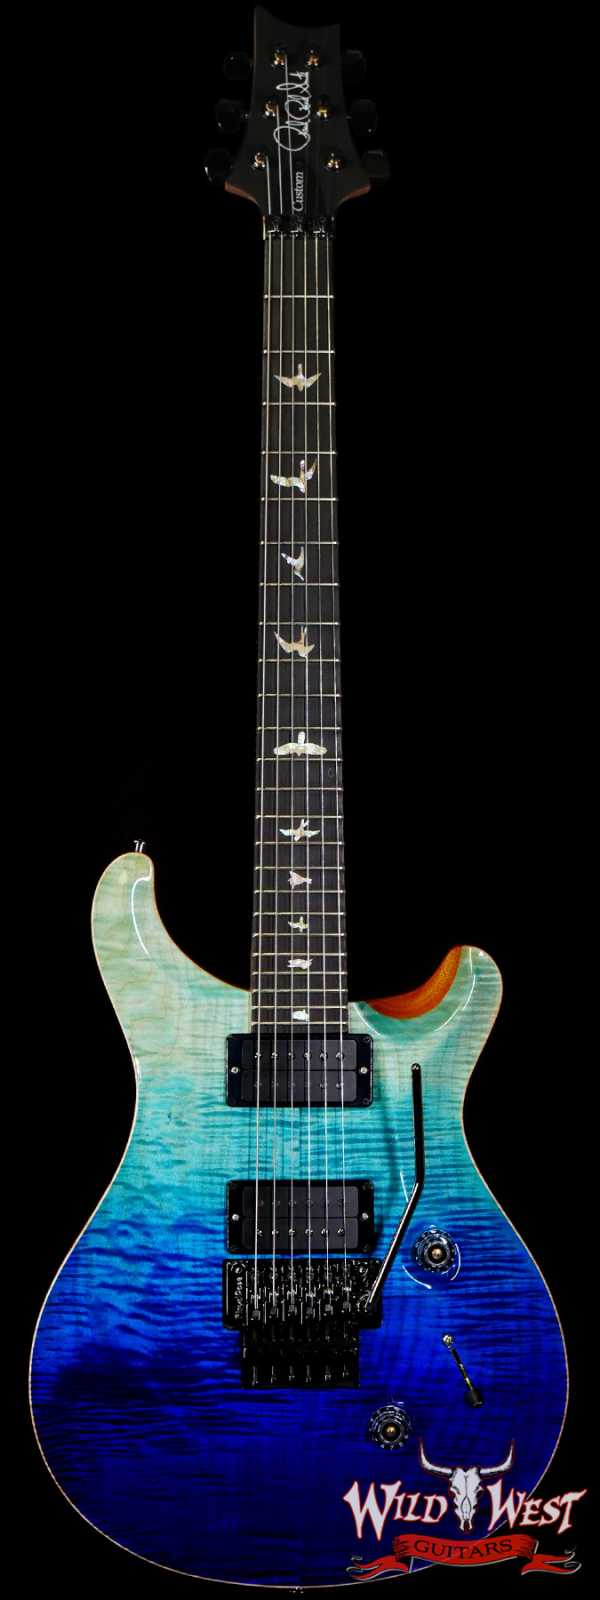 Paul Reed Smith PRS Wood Library 10 Top Custom 24 Floyd Rose Ebony Fingerboard Flame Maple Neck Blue Fade